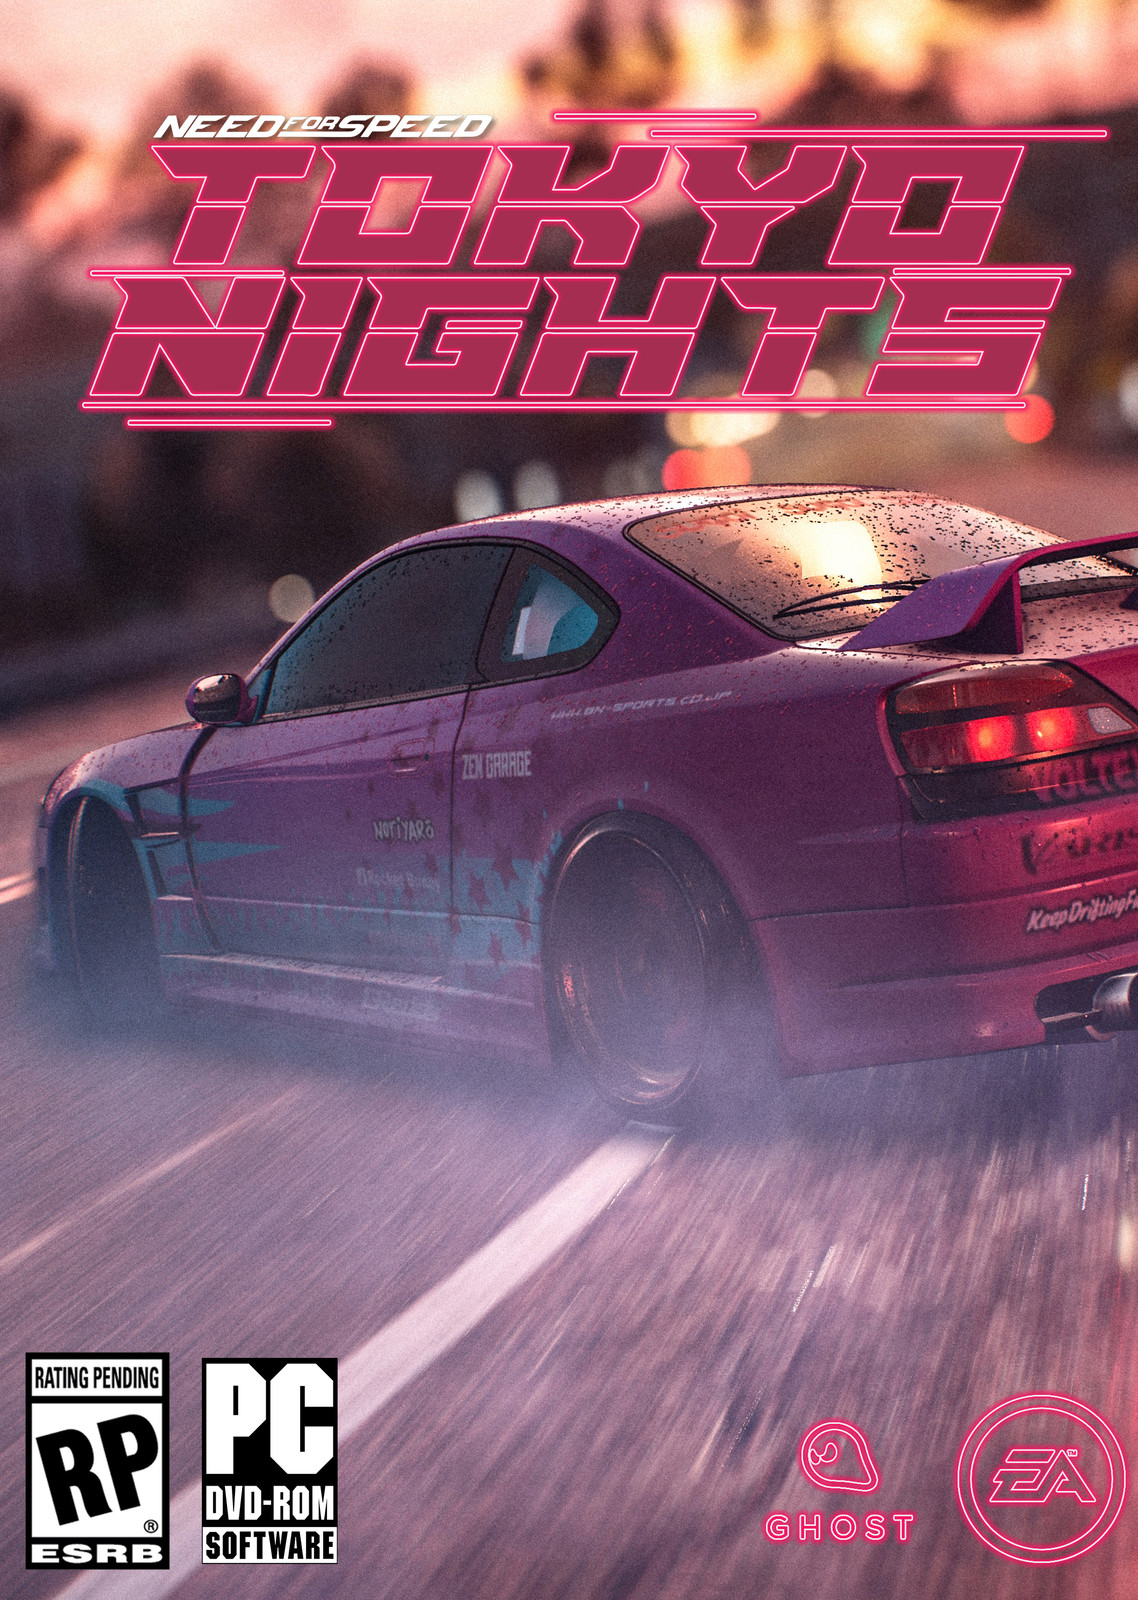 Need for Speed: Tokyo Nights (Based on the concept of JvyPennant, image from Djinn Banter)